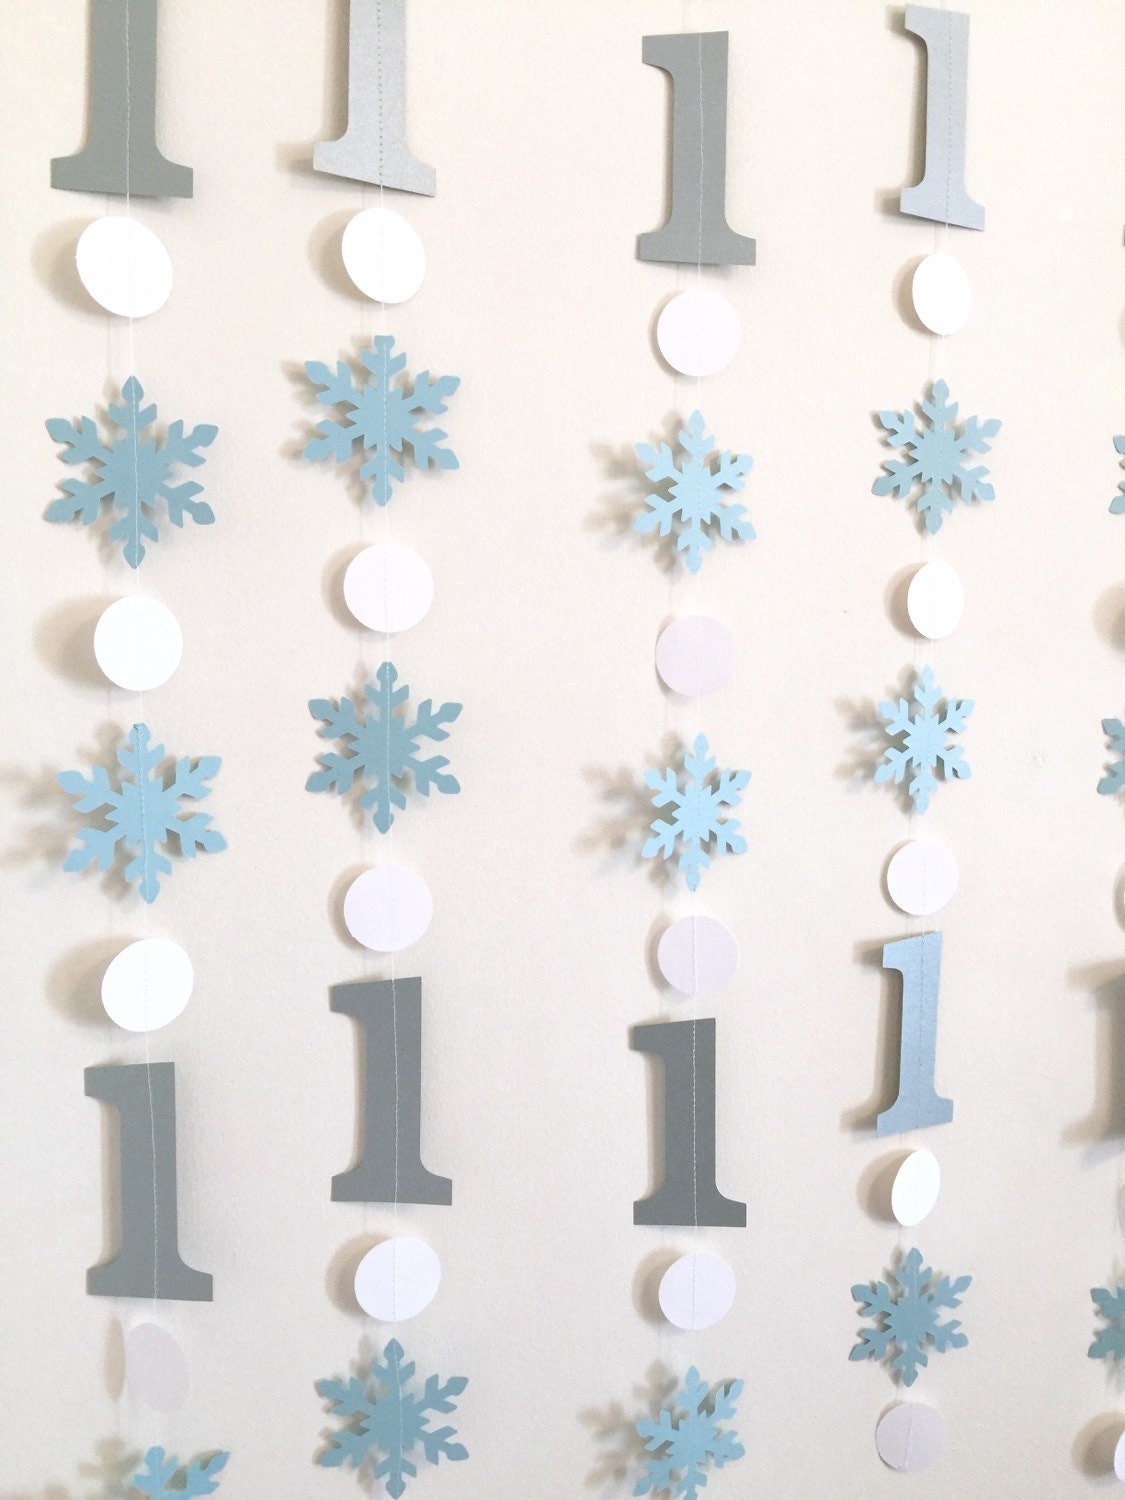 Onederland Decor Pink and Silver Winter Onederland Birthday Decorations 1st 2nd 3rd Snowflake Themed Birthday Garland Boy/Girl Snowflake birthday backdrop Your color choice Snowflake banners 